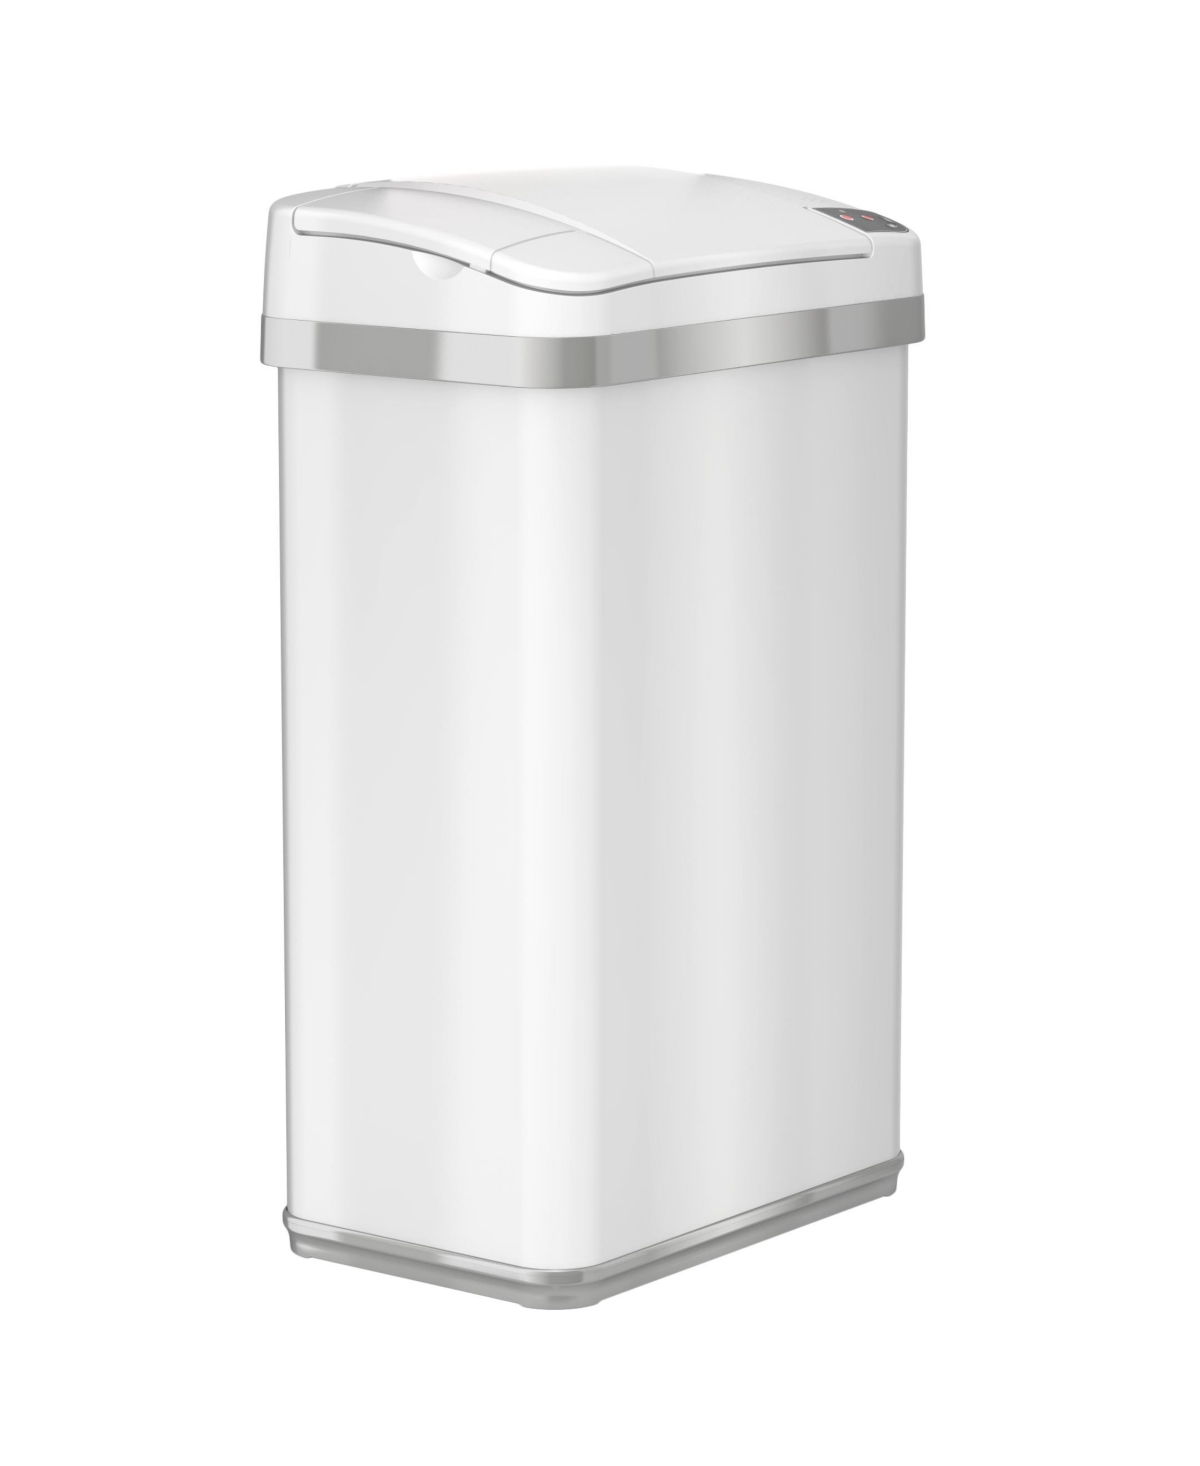 iTouchless 4 Gallon White Steel Touchless Trash Can with Deodorizer & Fragrance - White